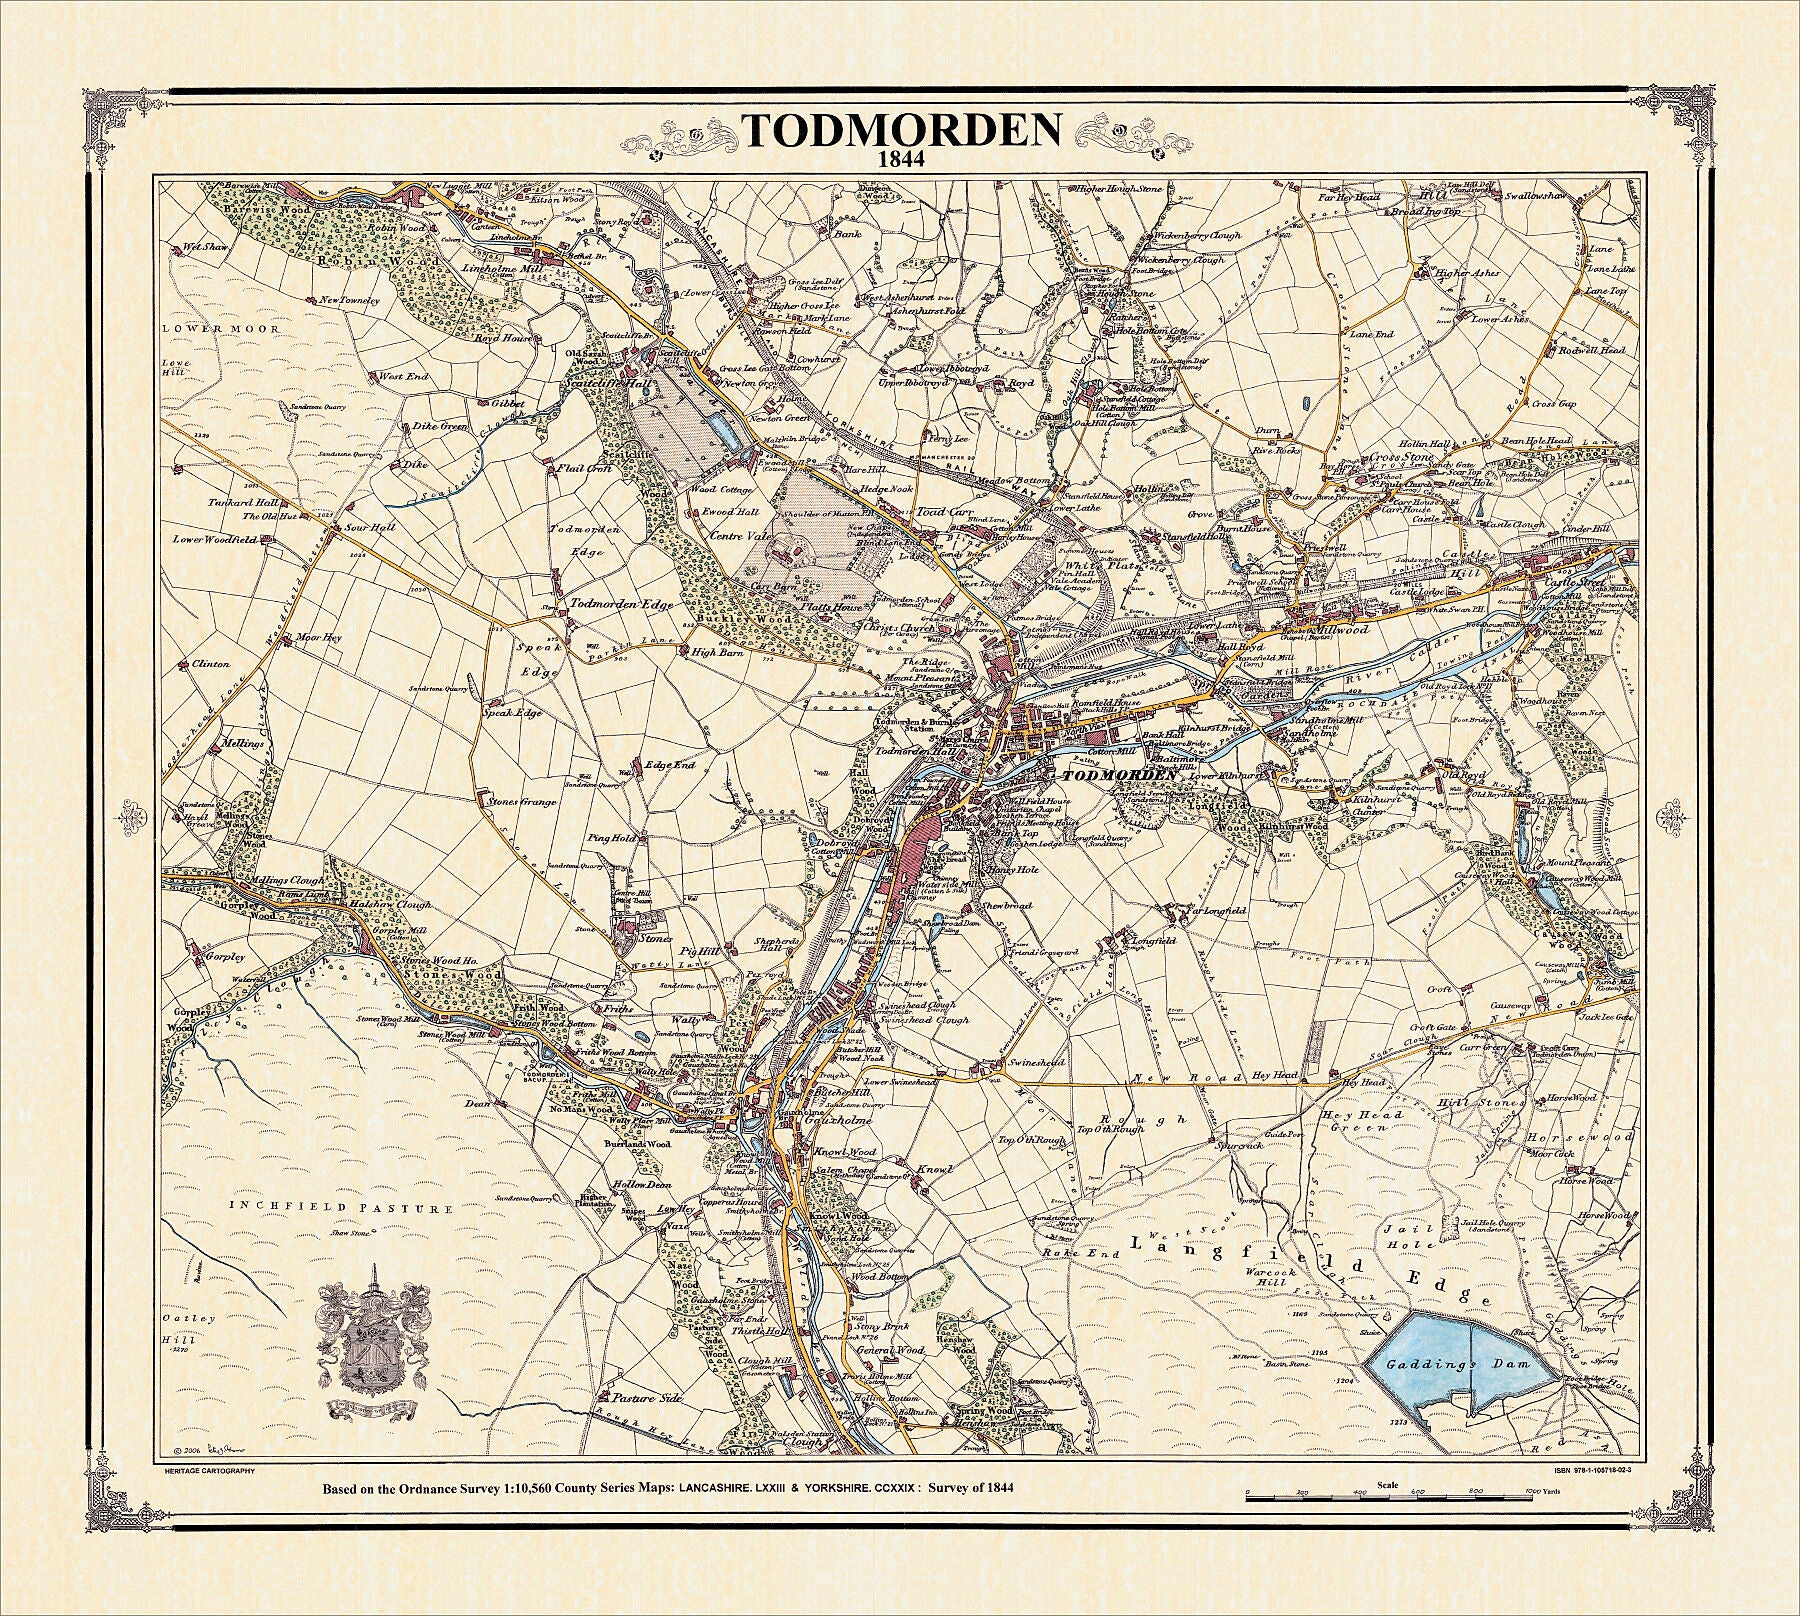 Coloured Victorian map of Todmorden in 1844 by Peter J Adams of Heritage Cartography